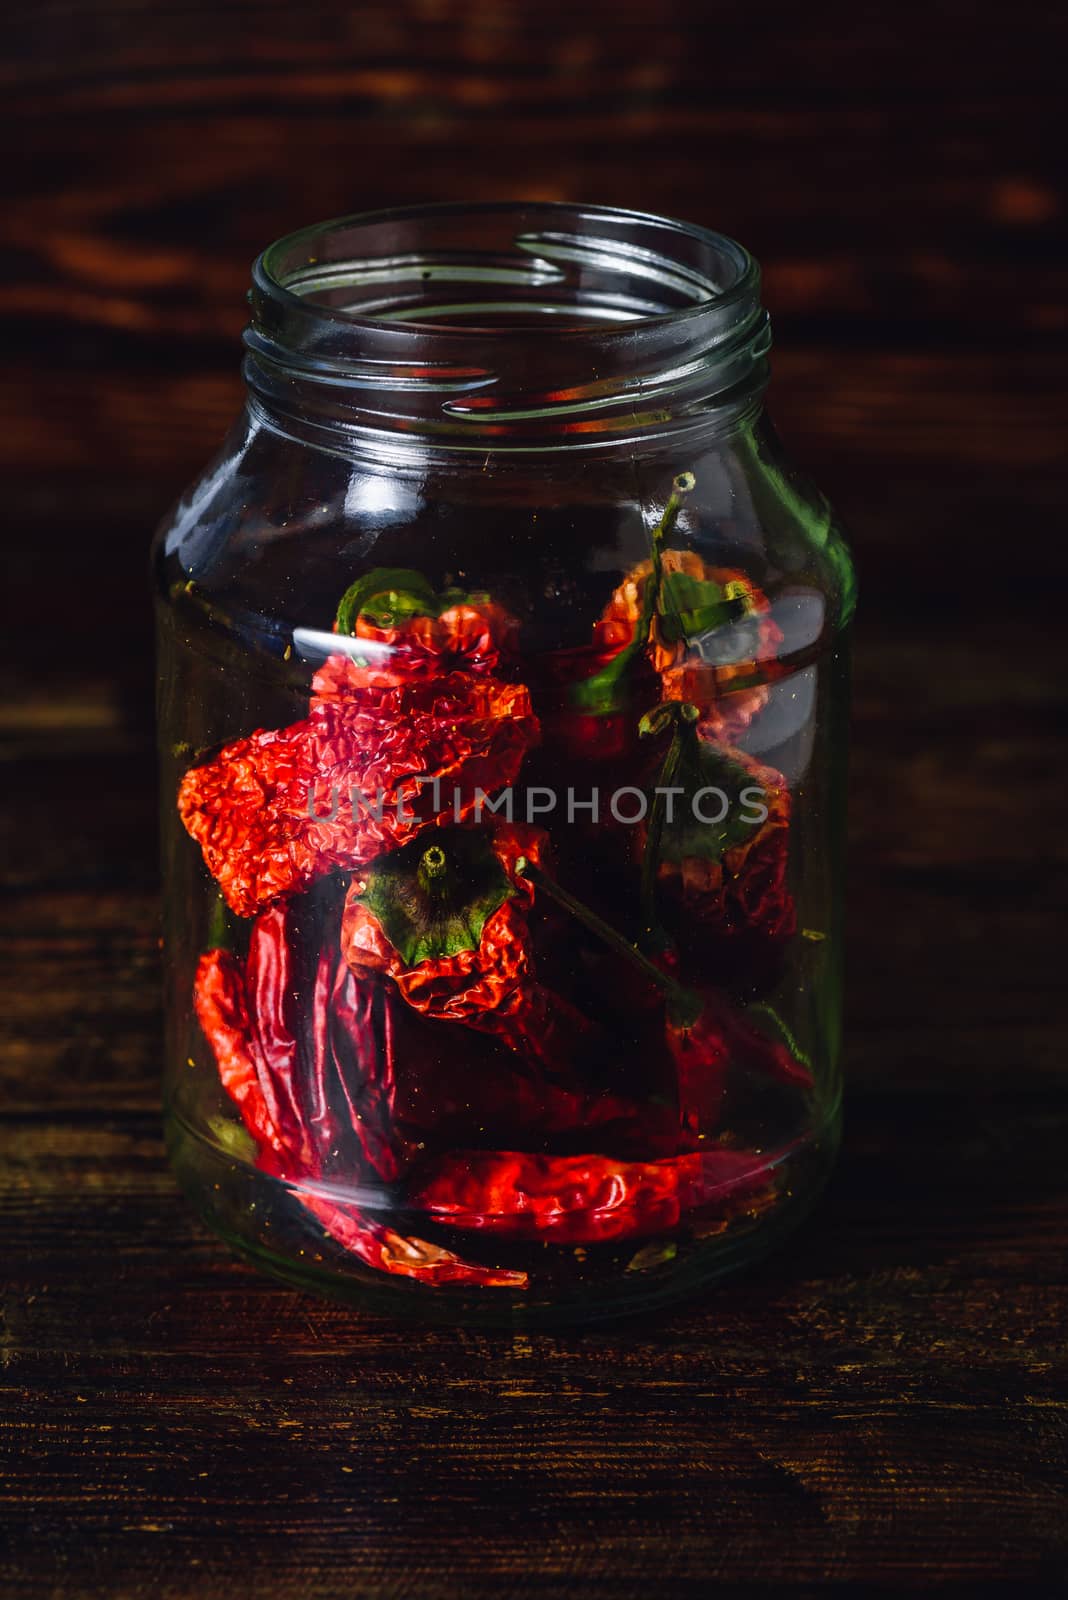 Jar of Dried Red Chilies. by Seva_blsv